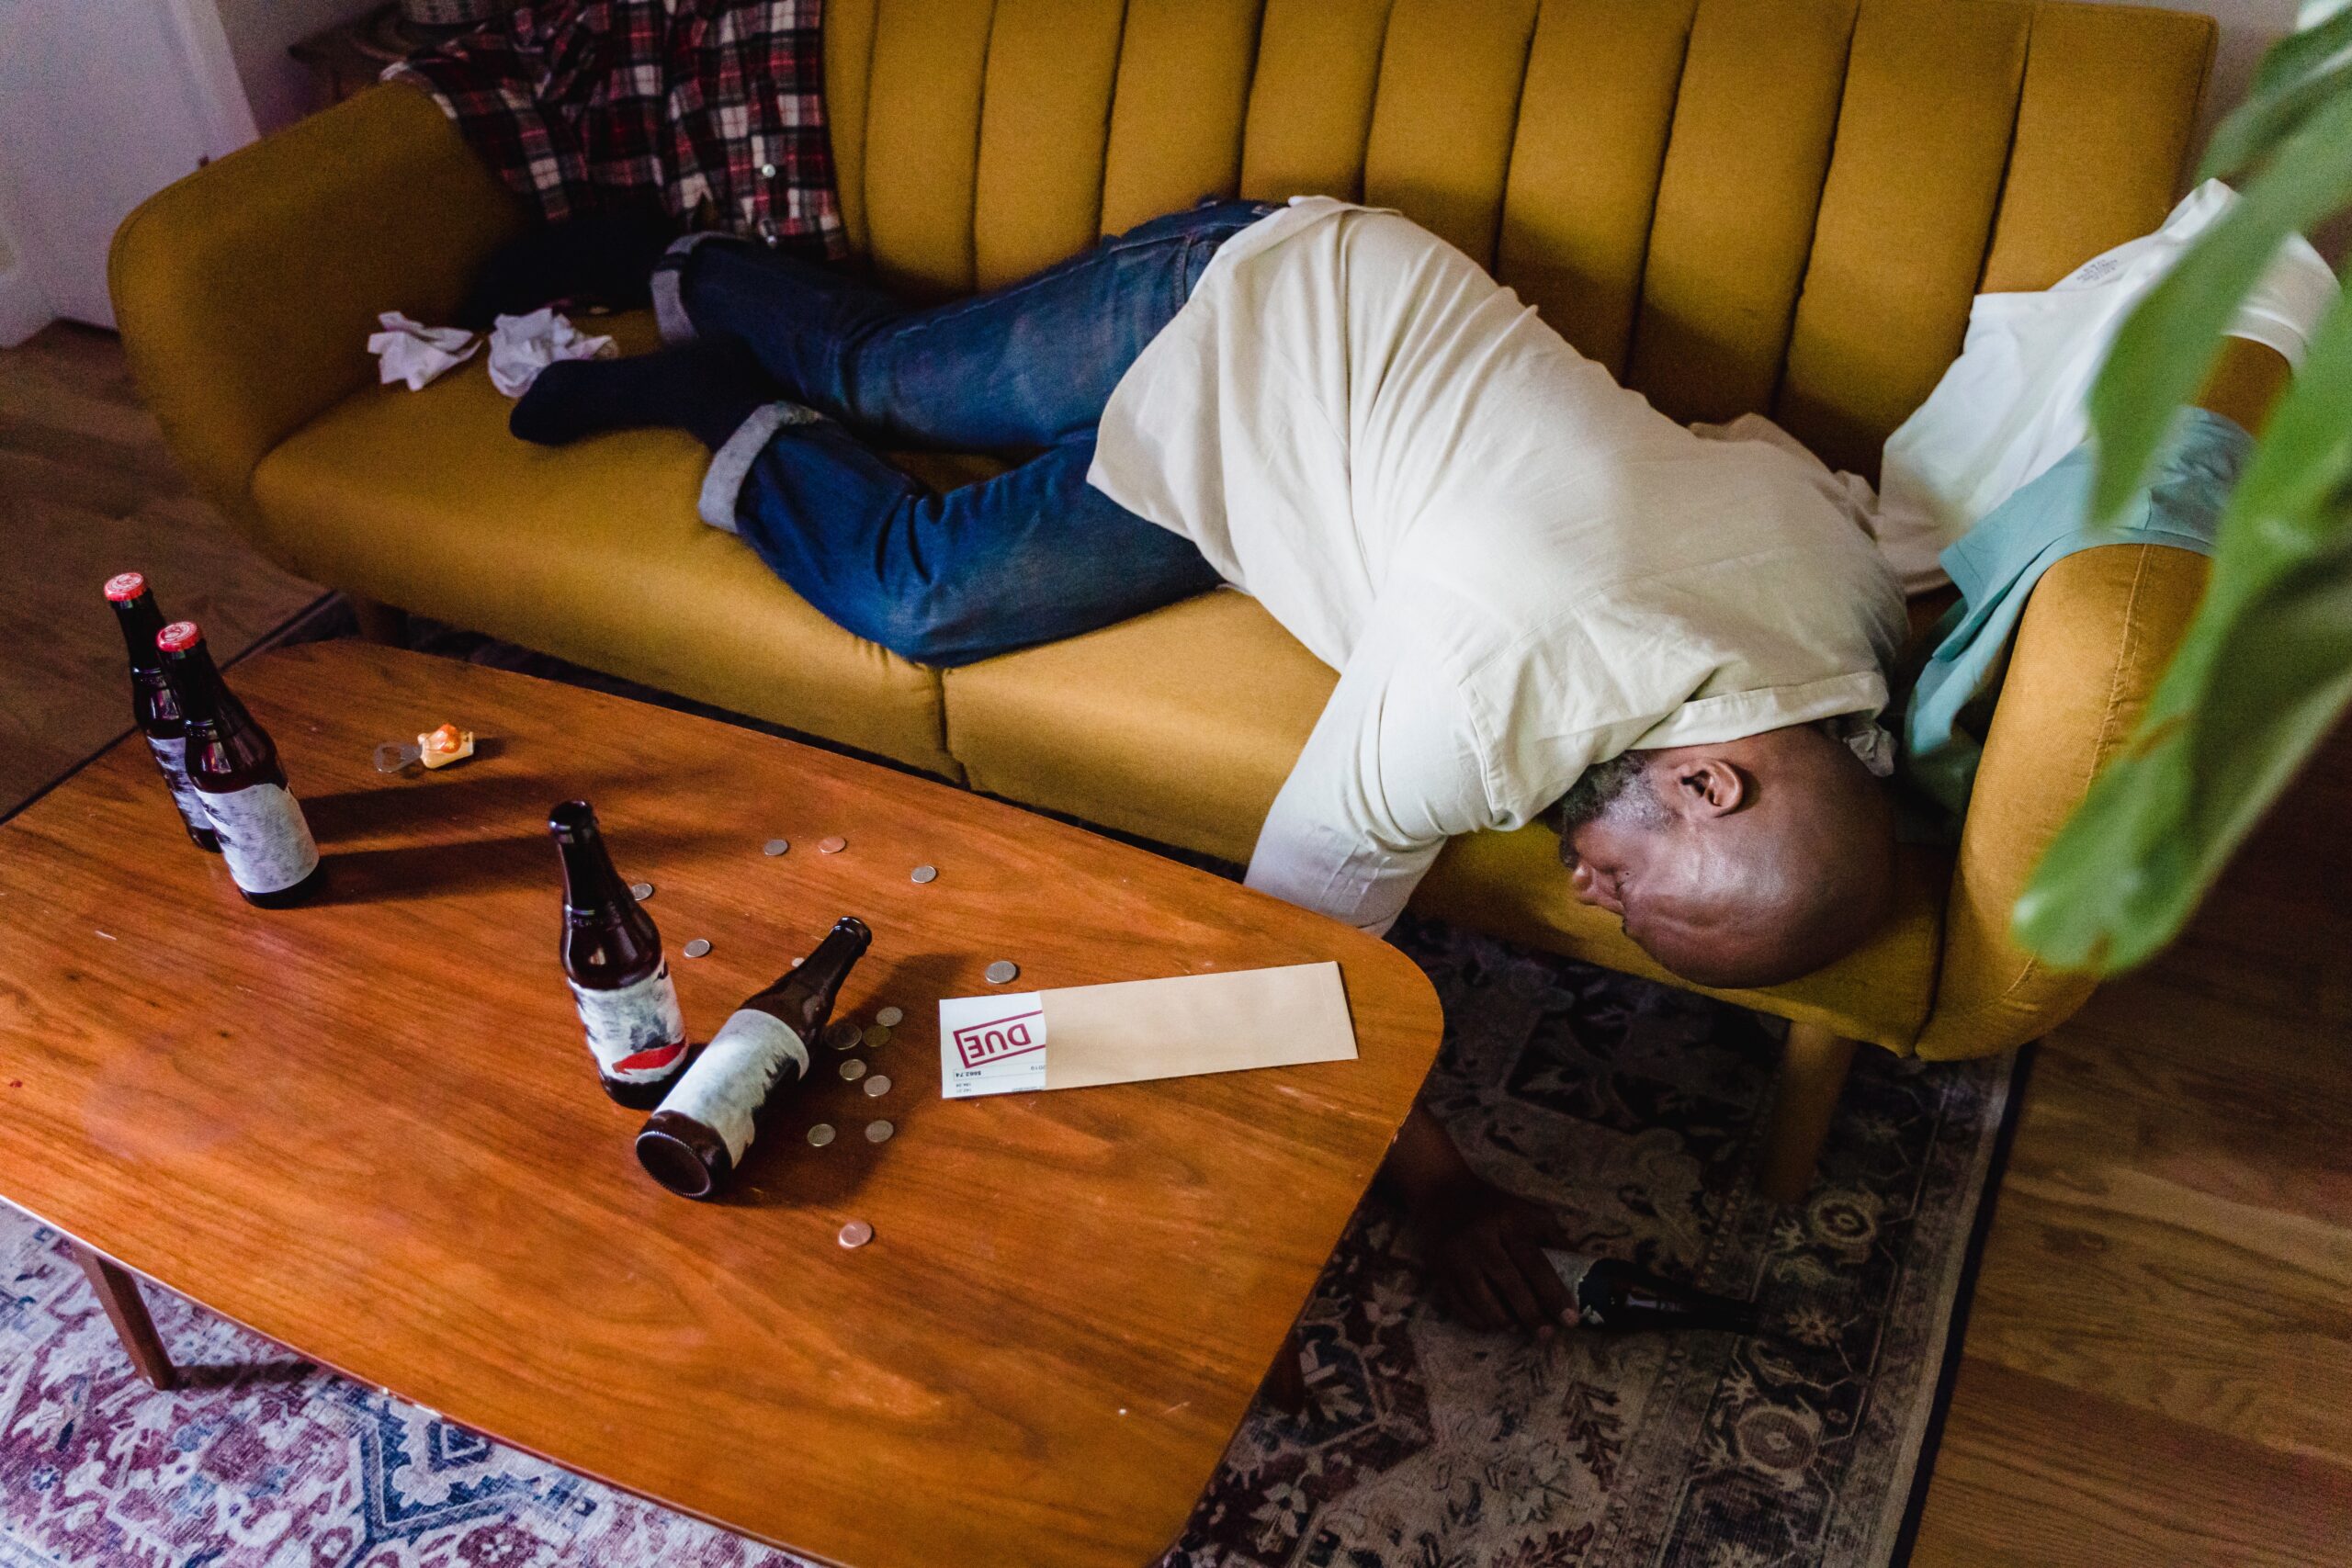 A man lying on the couch with alcohol bottles